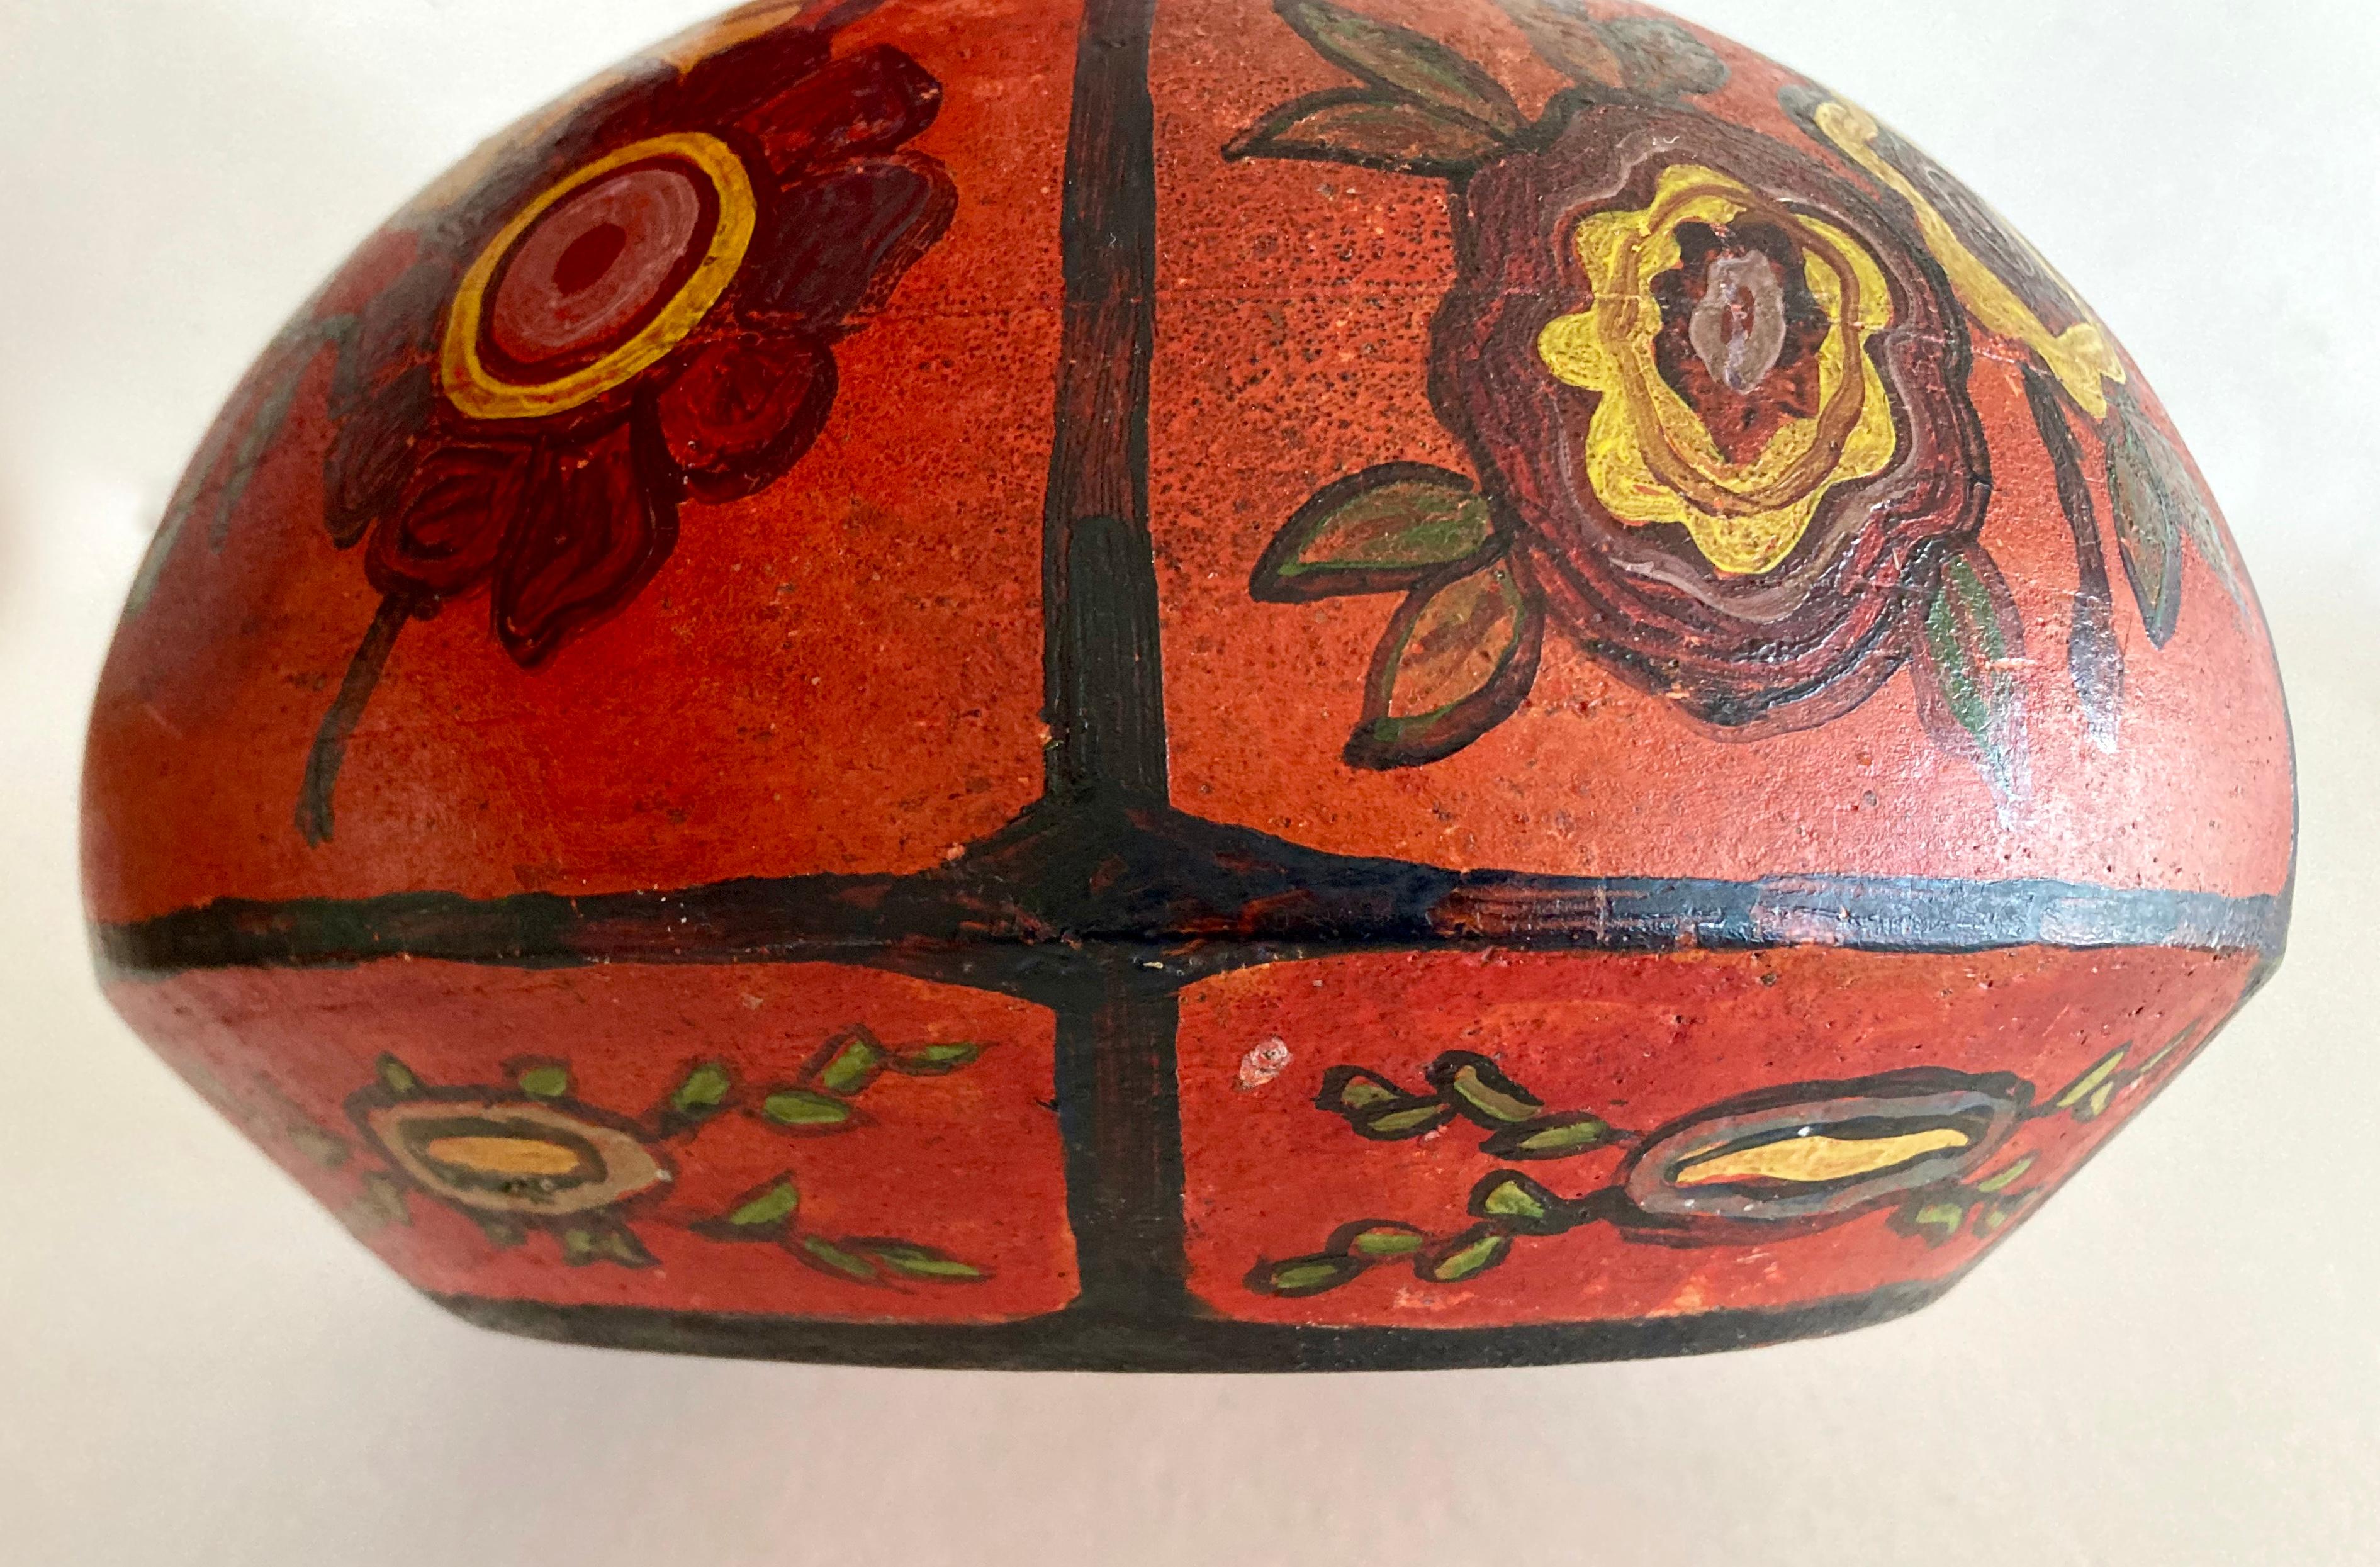 Antique Hand-Thrown and Hand-Painted Art Pottery Vase with Floral Motifs   For Sale 3